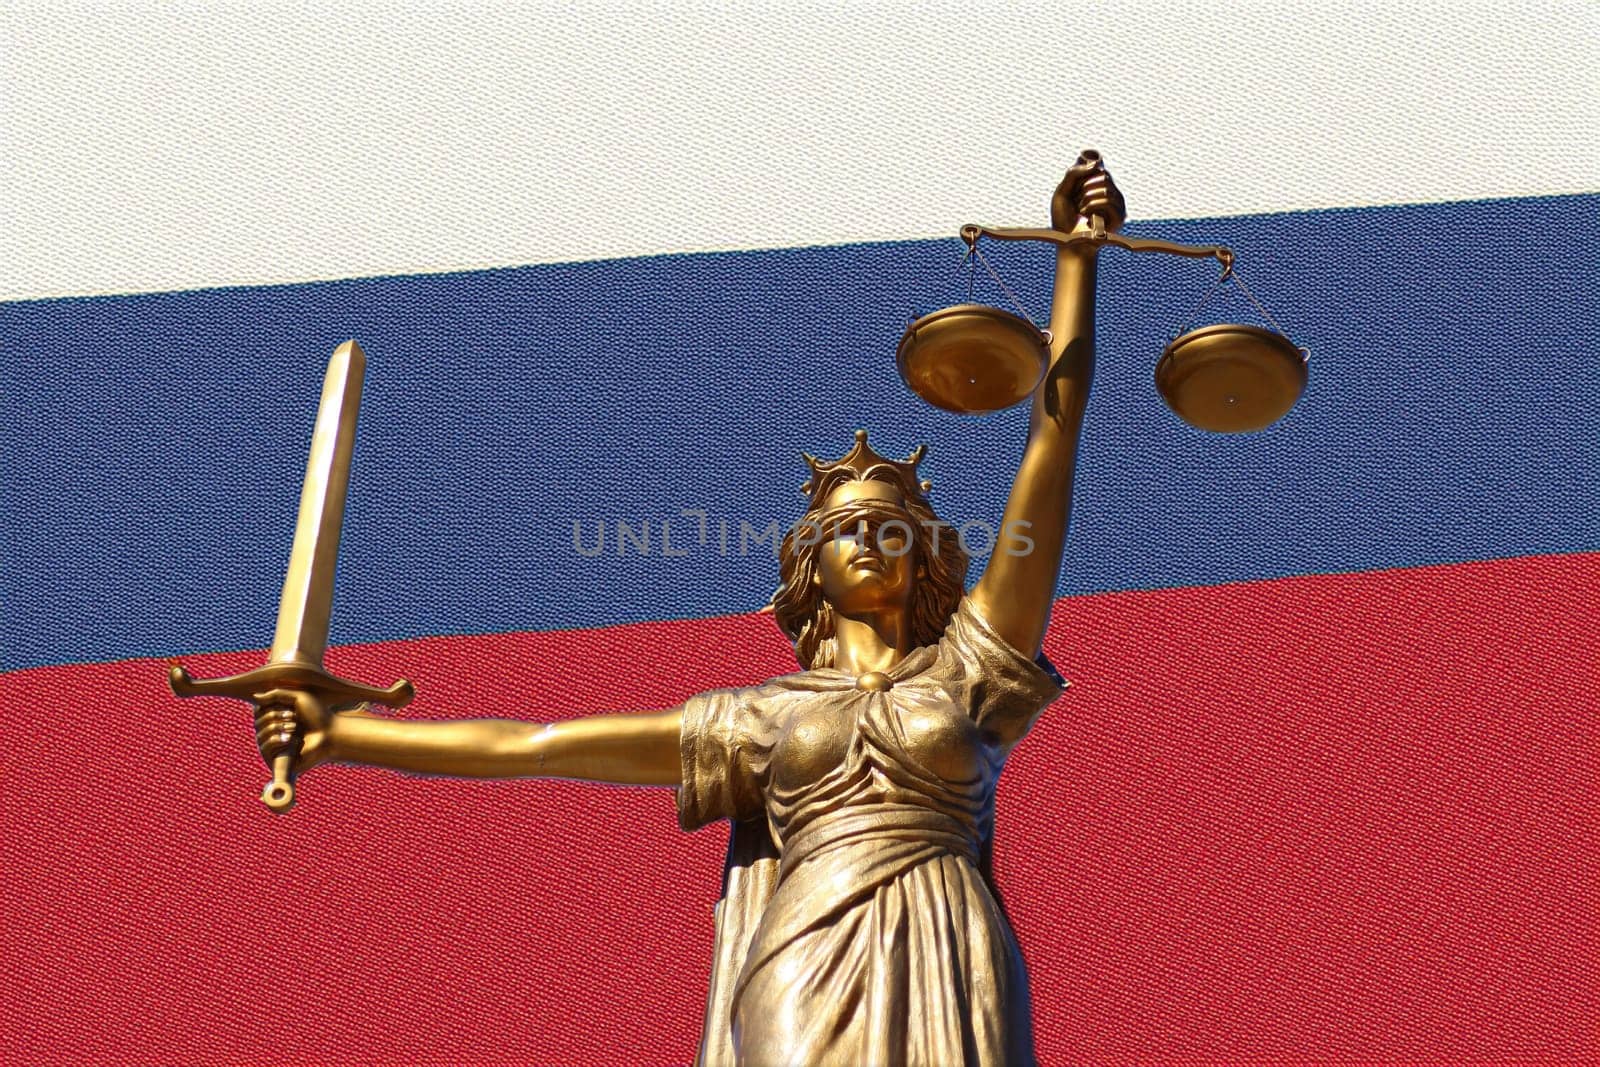 Scales of Justice, Lady Justice, Lady Justice in front of the Russian flag in the background.